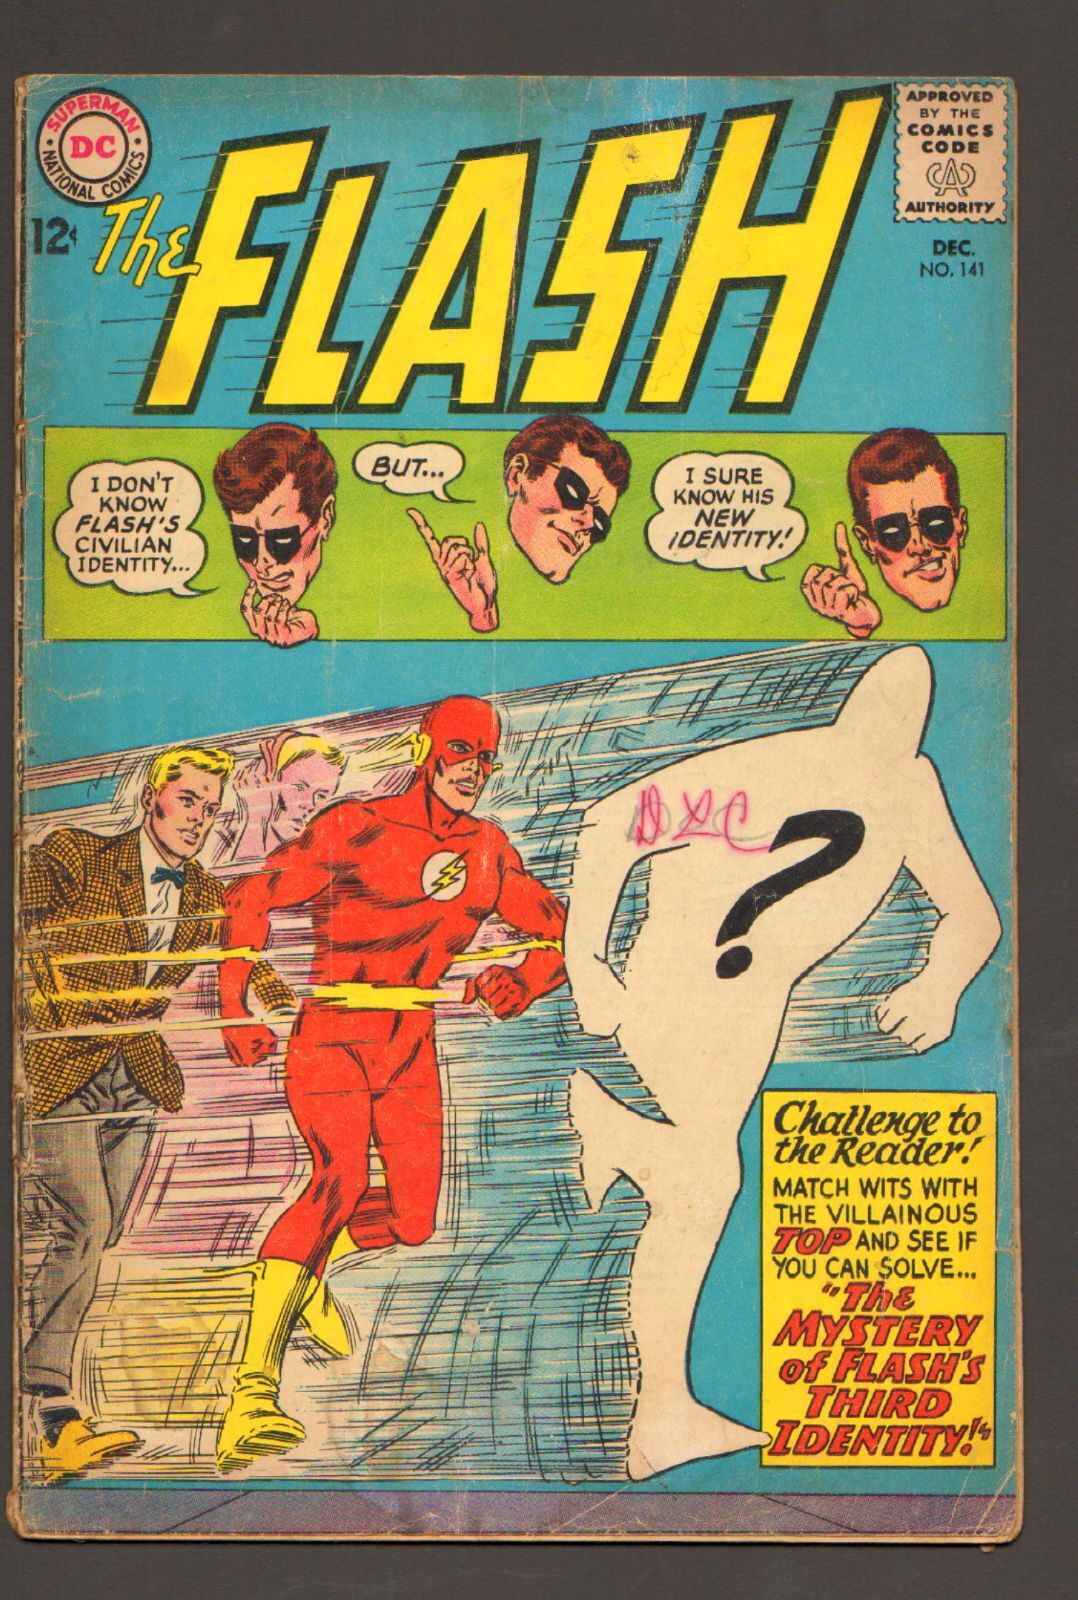 The Flash #141 - 3rd Identity - 1963 (Grade 2.5) WH